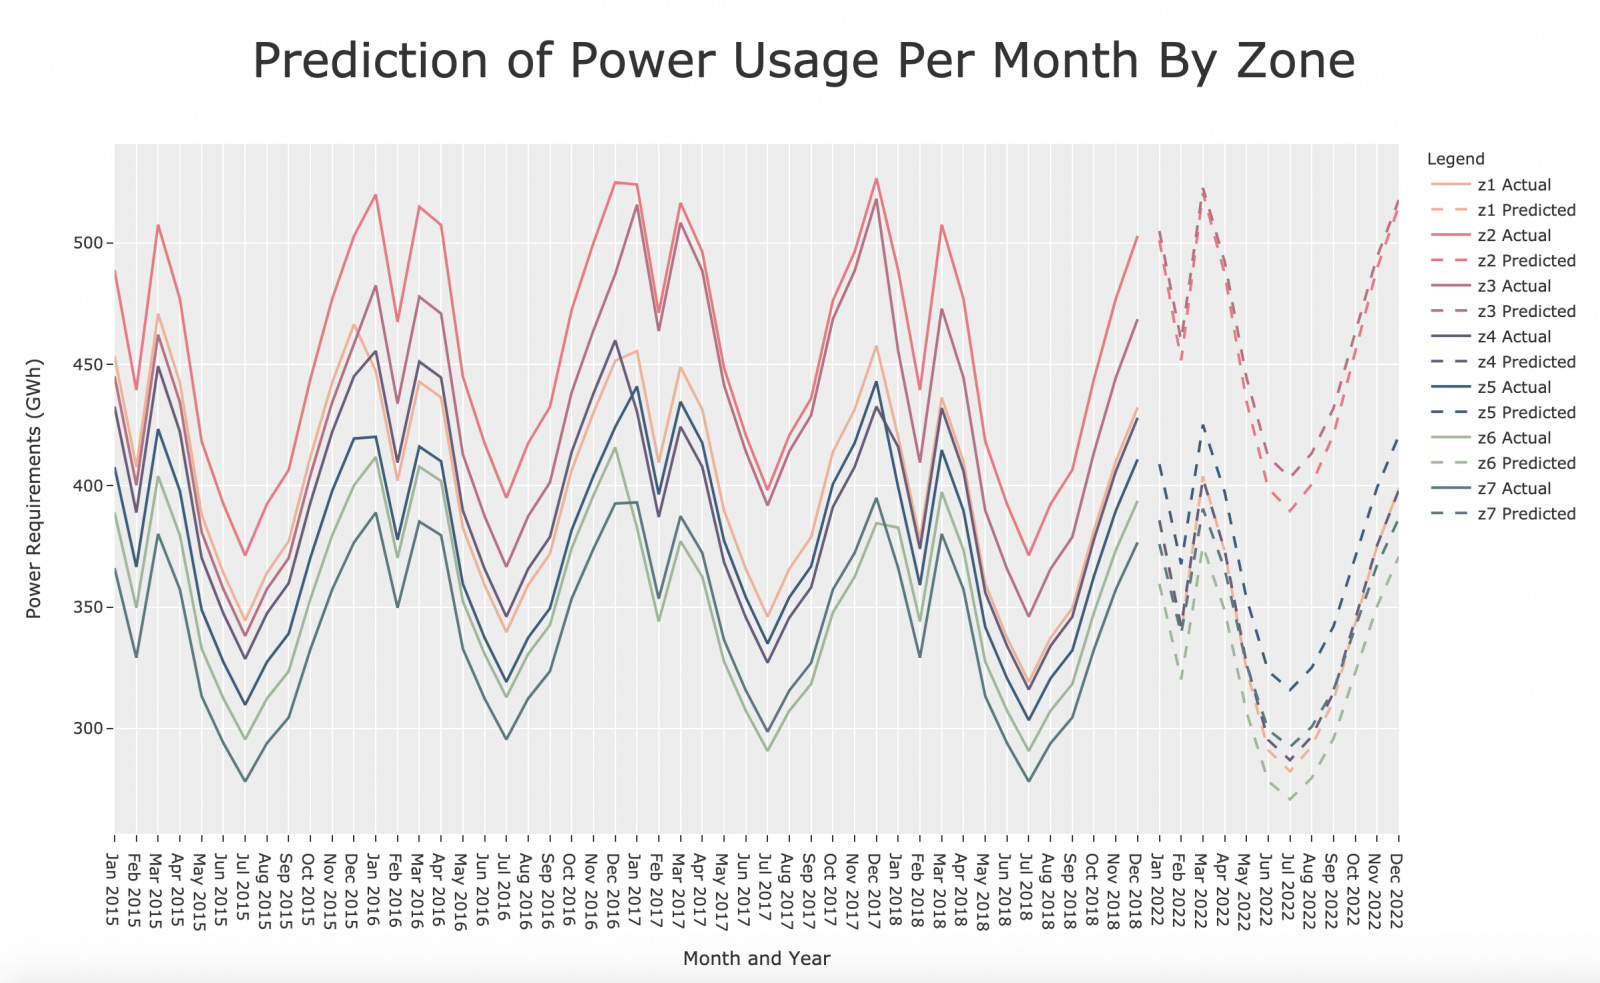 Prediction of Power usage per month by zone